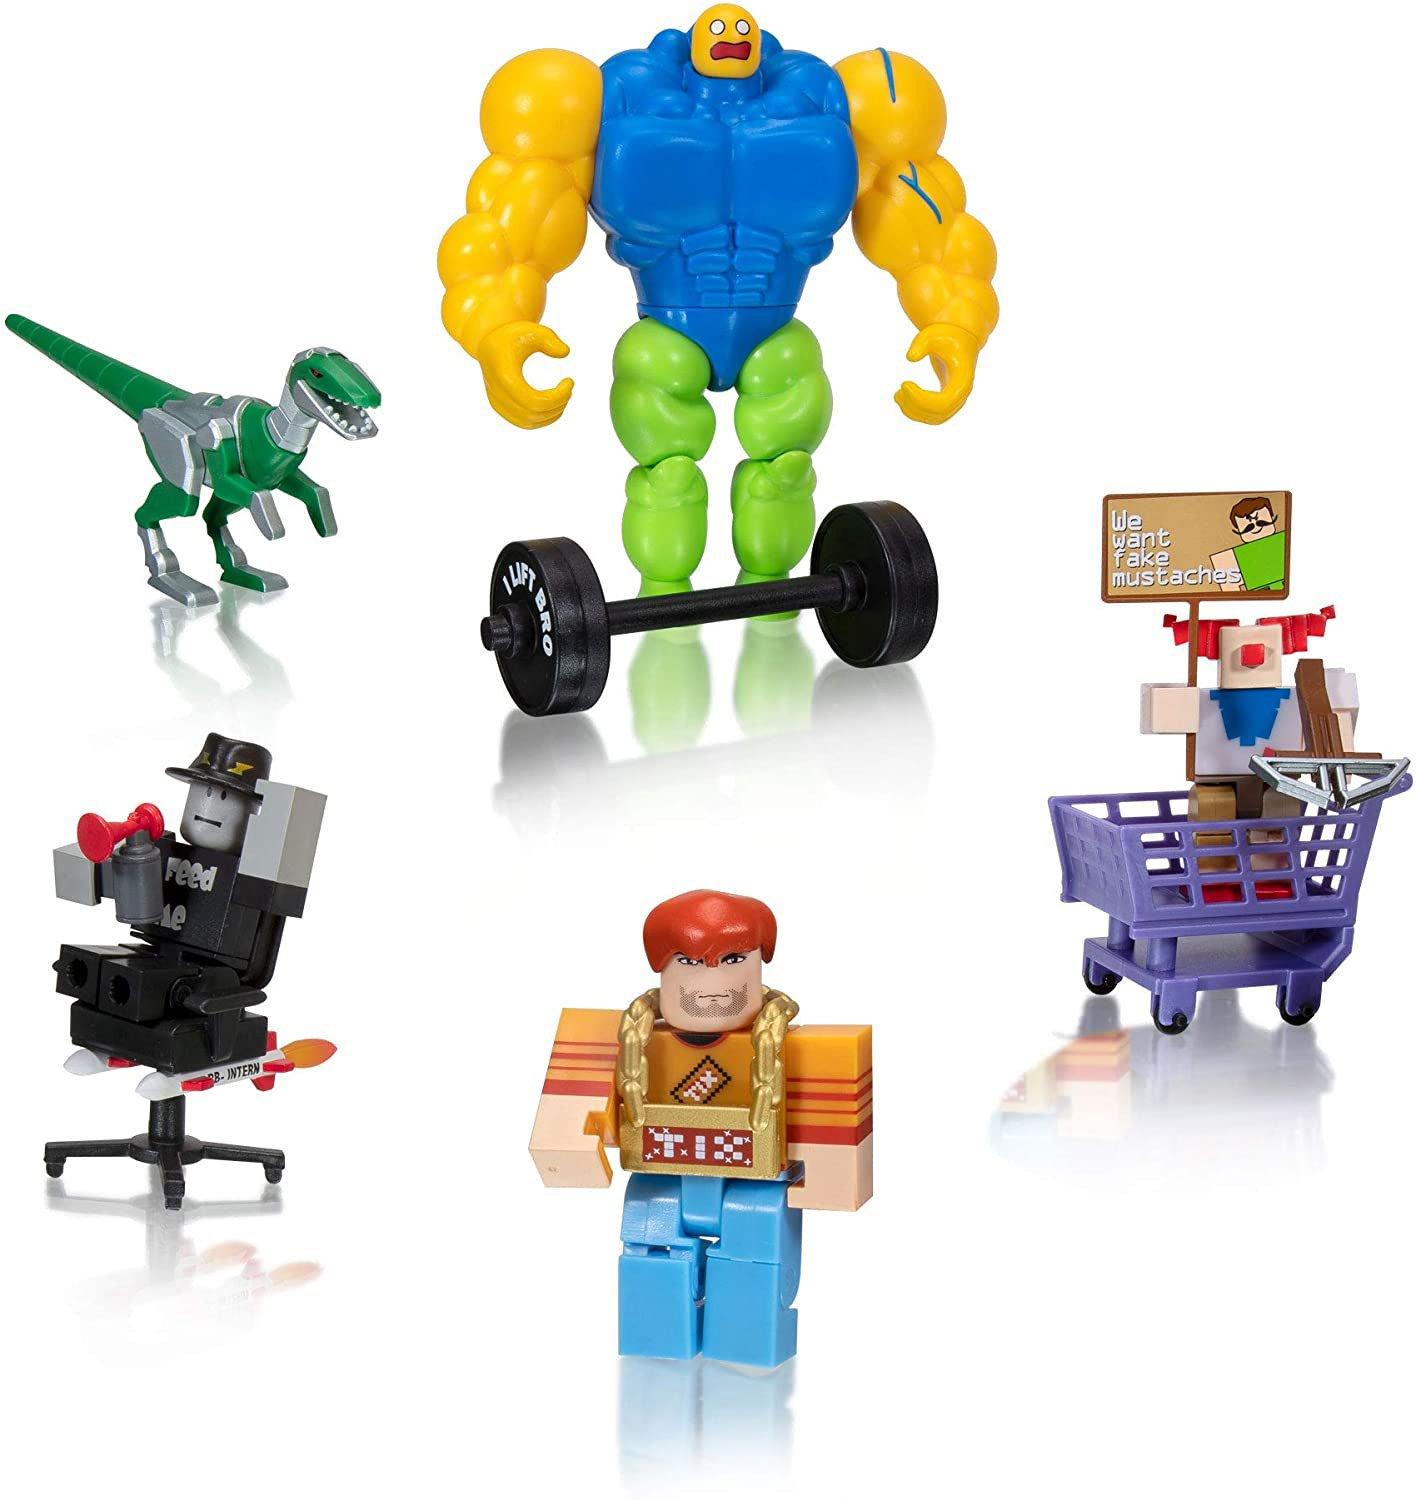 Roblox Action Collection Meme Pack Playset Includes Exclusive Virtual Item Gamestop - gamestop roblox toys